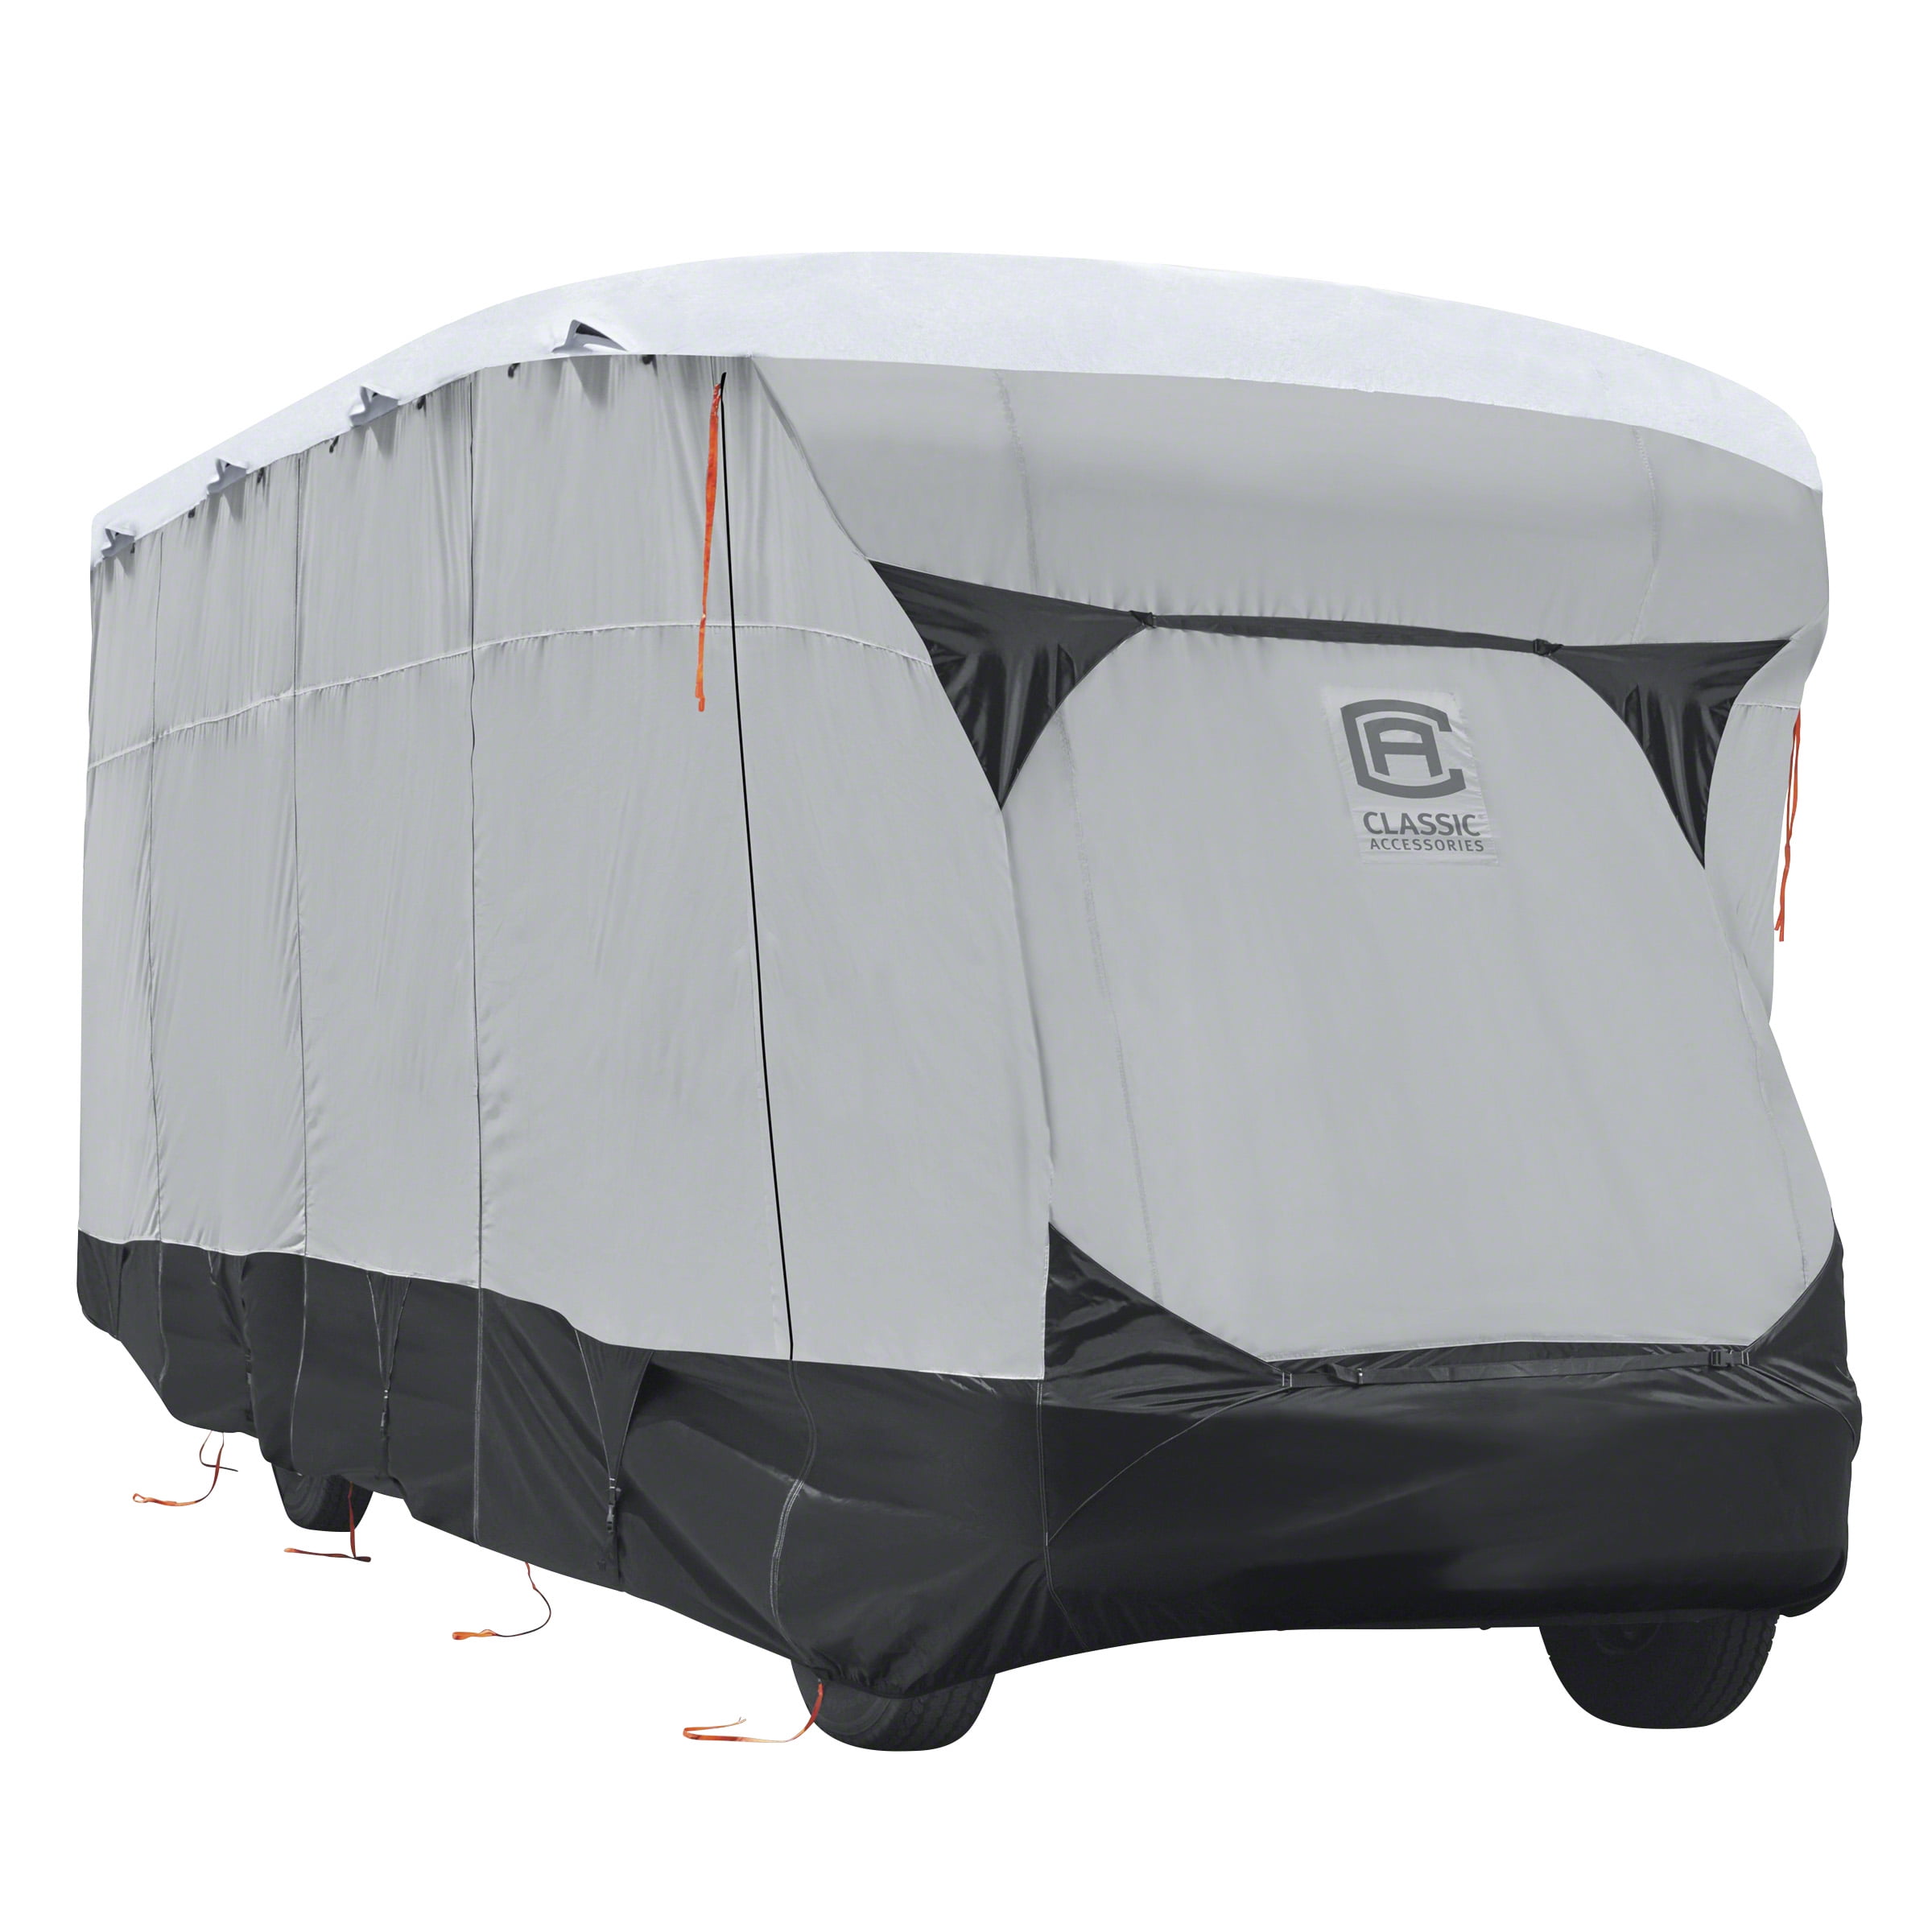  Classic Accessories Over Drive PolyPRO 3 Deluxe Class C RV  Cover, Fits 26' - 29' RVs, Model 4, Air Vents, Water-Repellant Top Panel,  Durable, Breathable, Resists Tears and Rips, Grey/White 